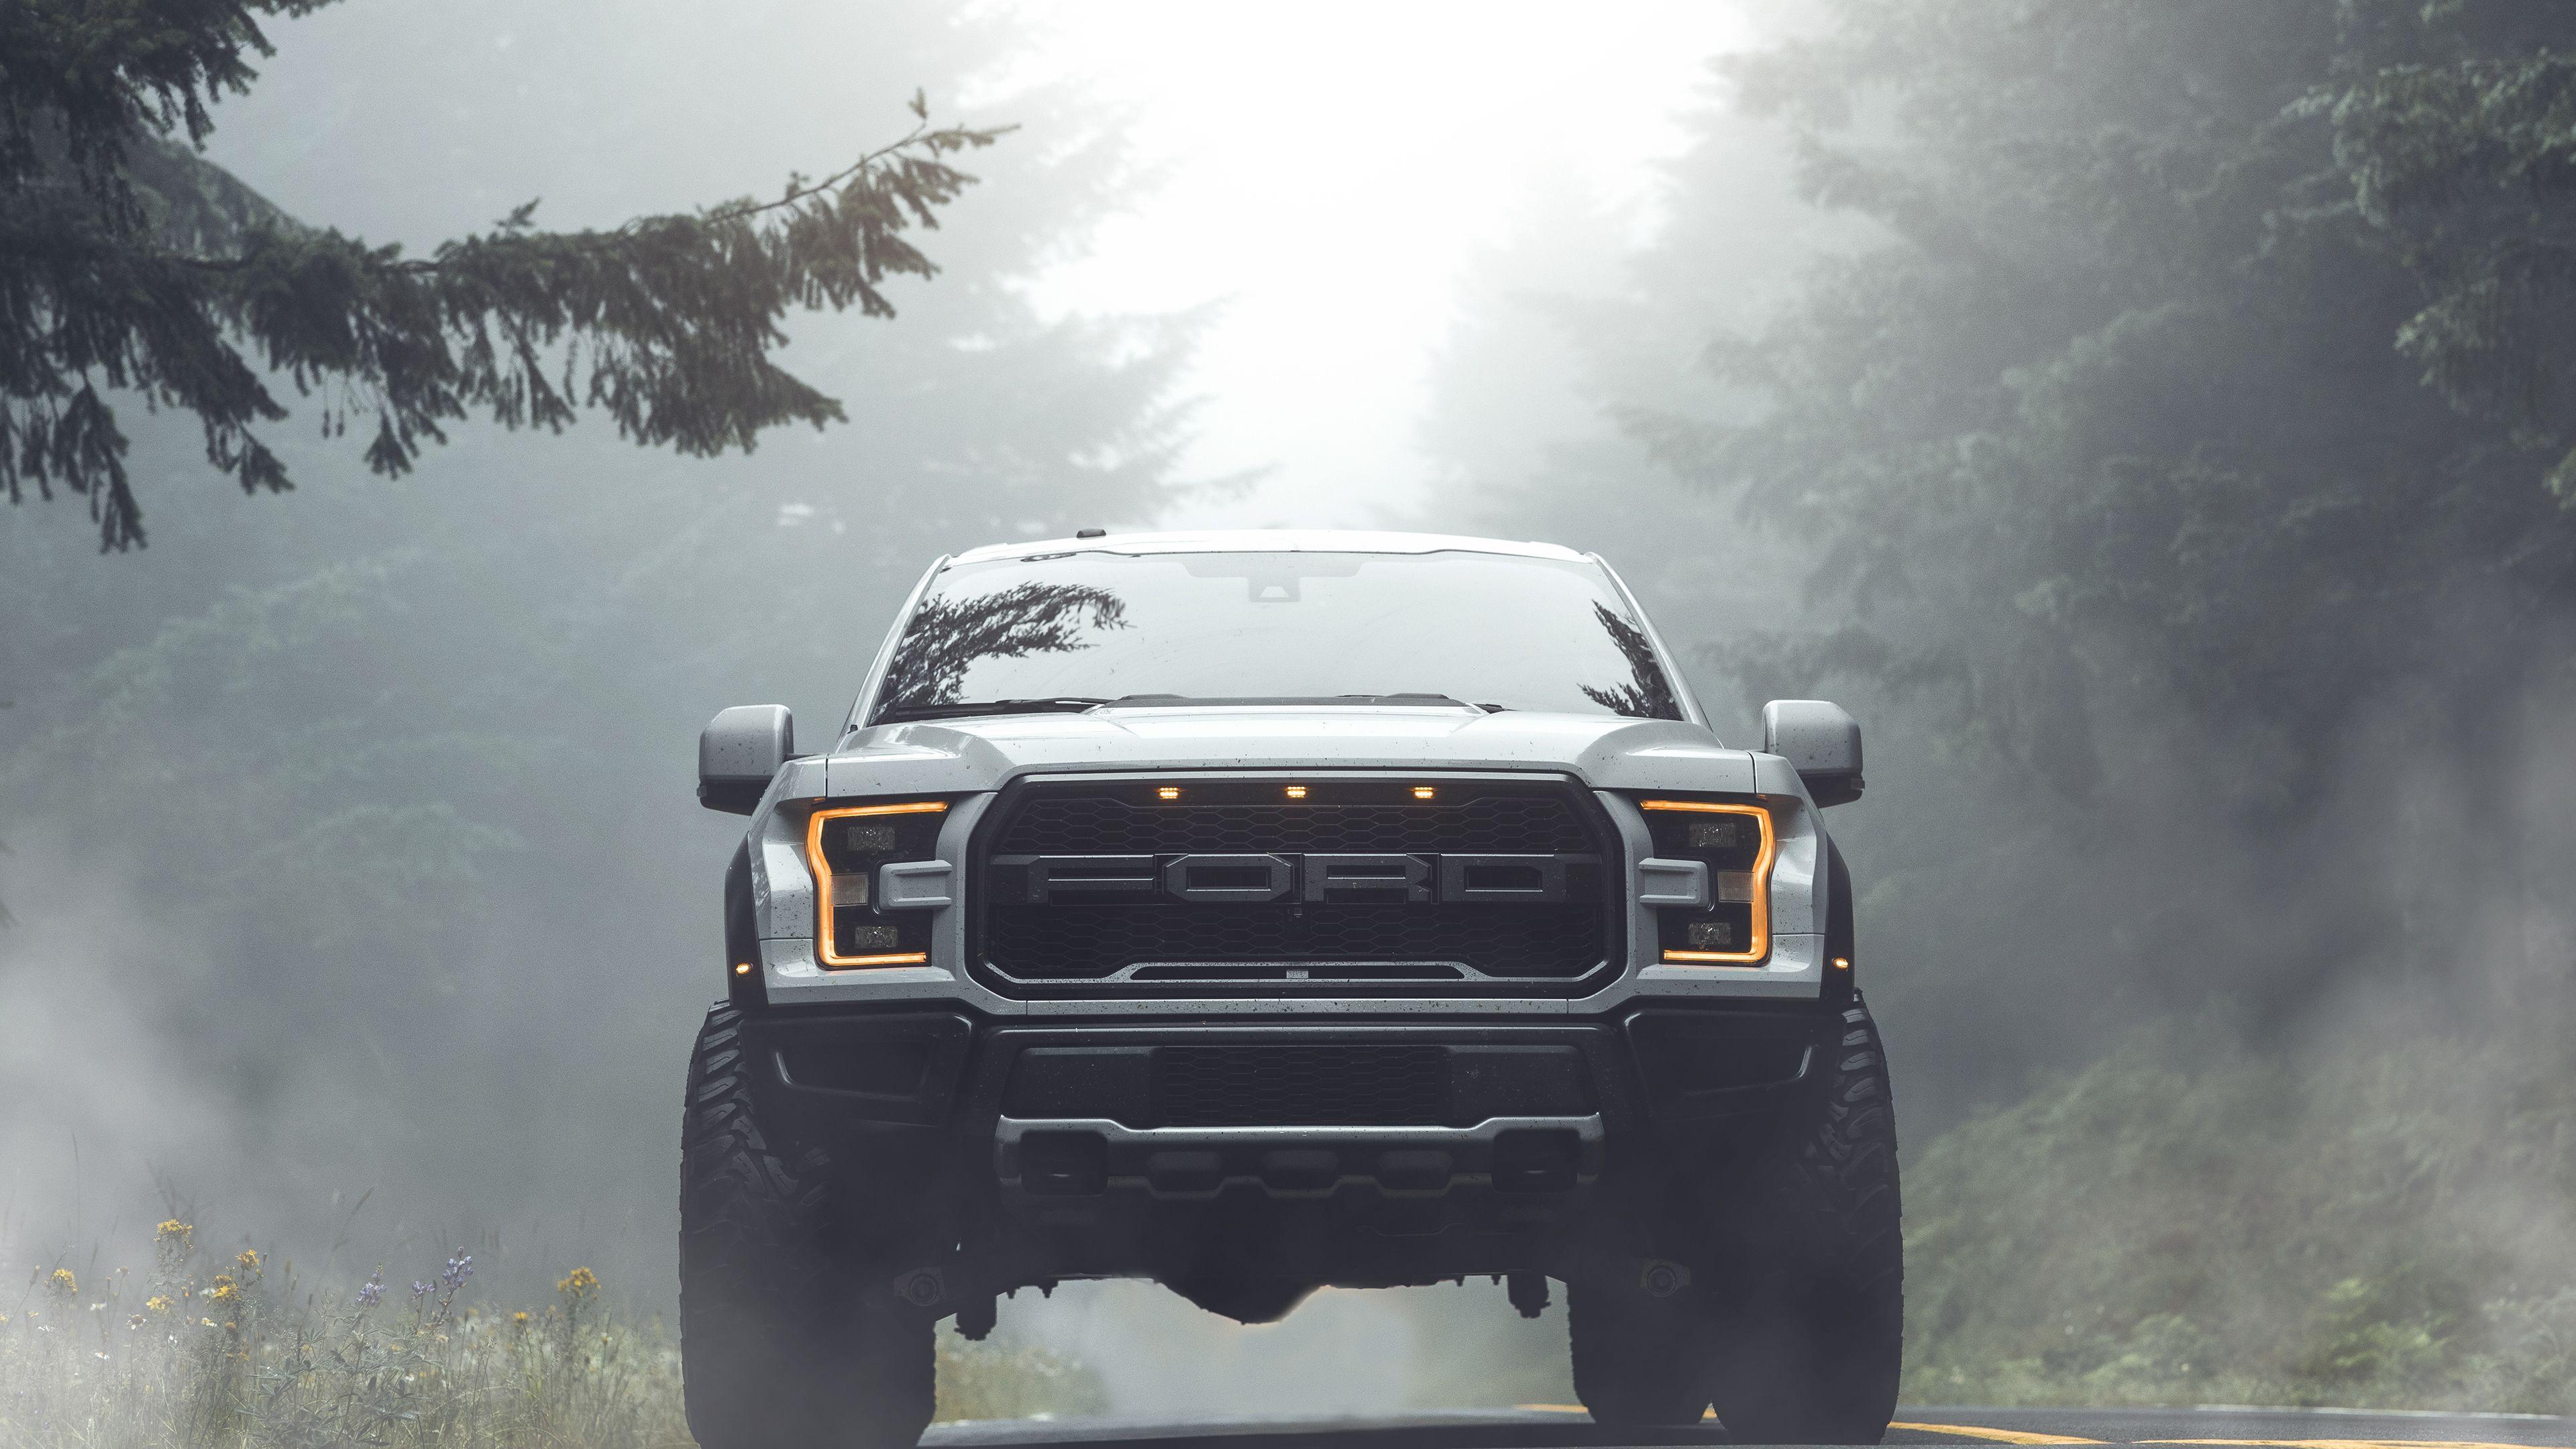 Ford Raptor Truck Wallpapers Top Free Ford Raptor Truck Backgrounds Wallpaperaccess